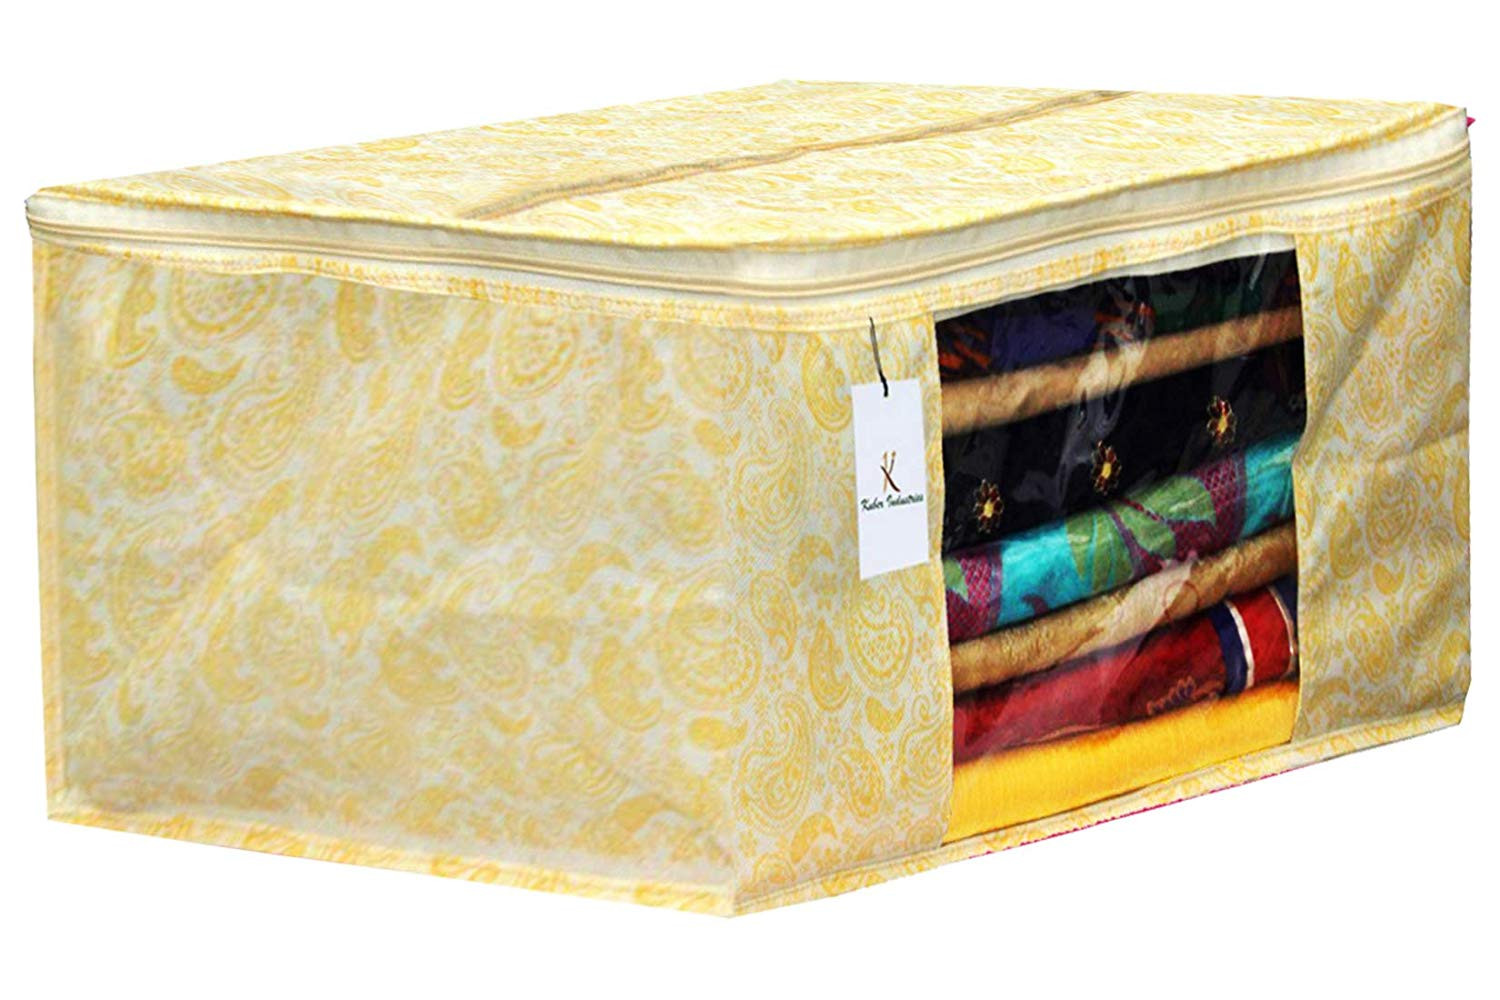 Kuber Industries Metalic Printed Non Woven Saree Cover And Underbed Storage Bag, Storage Organiser, Blanket Cover, Golden Brown & Gold -CTKTC42385